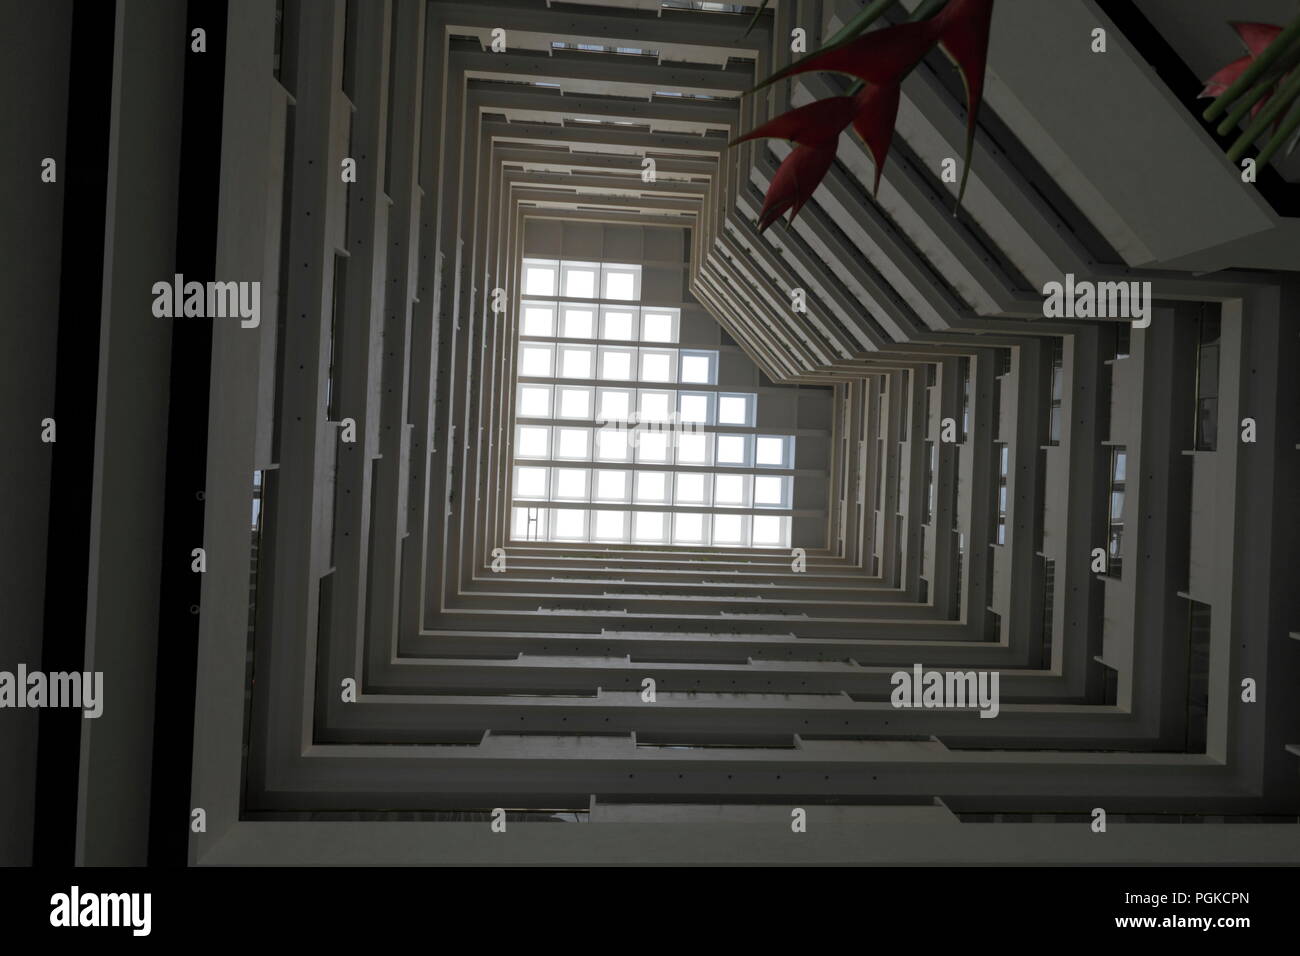 View of ceiling of Hotel Oberoi Tower (now Trident) Mumbai, India. Stock Photo